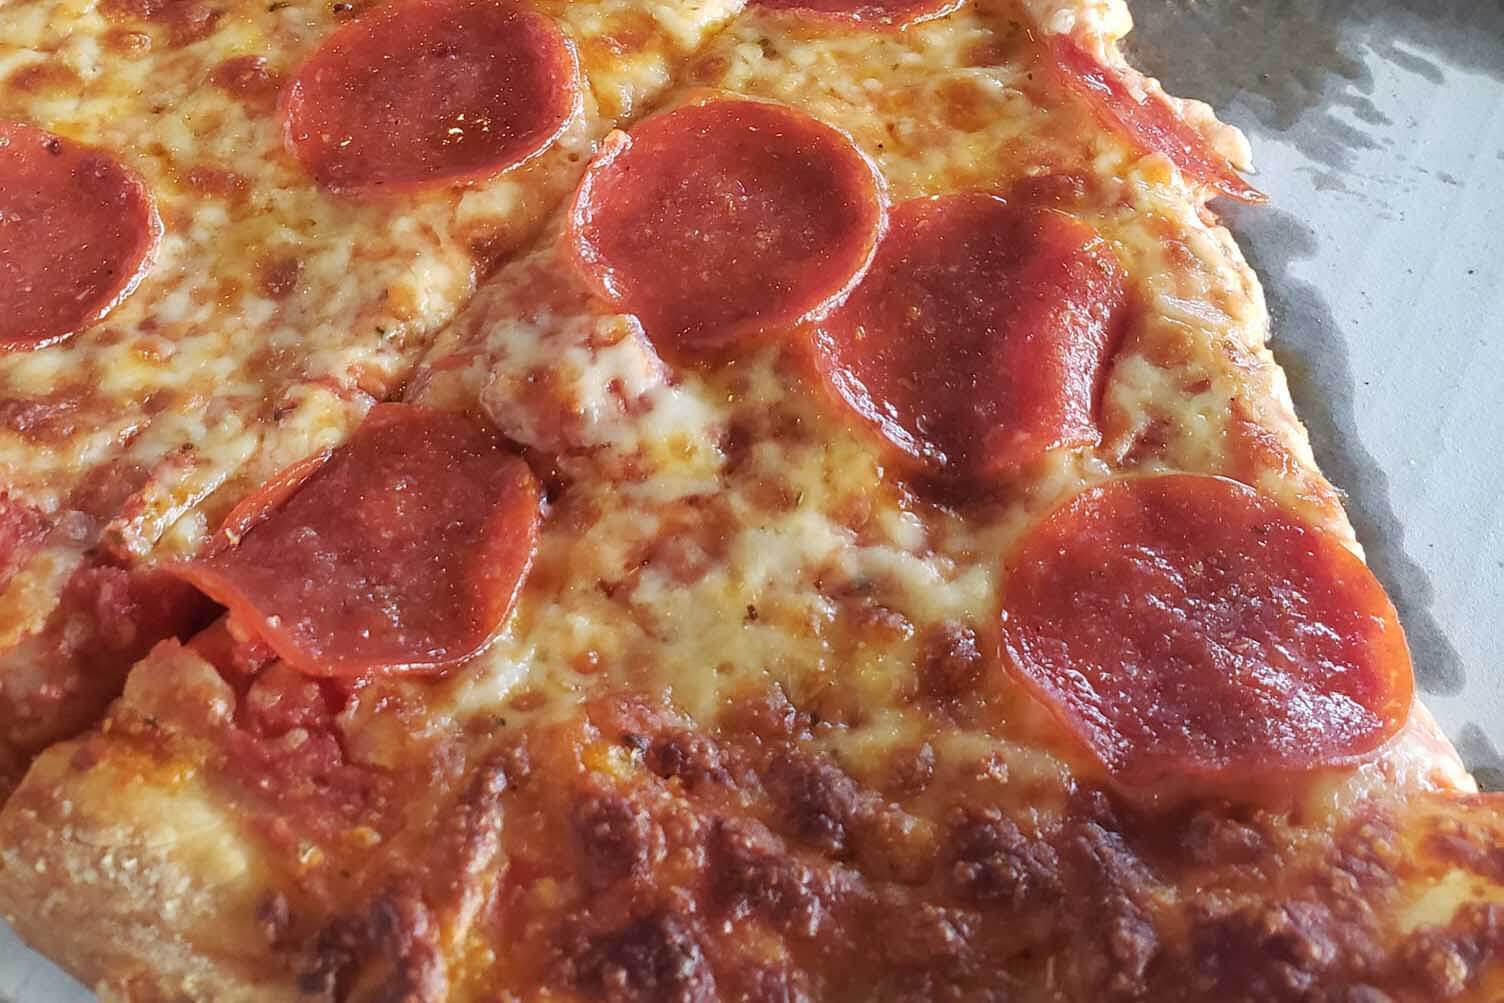 Pepperoni pizza at Nicks Slice Of Brooklyn Pizzeria and Bar